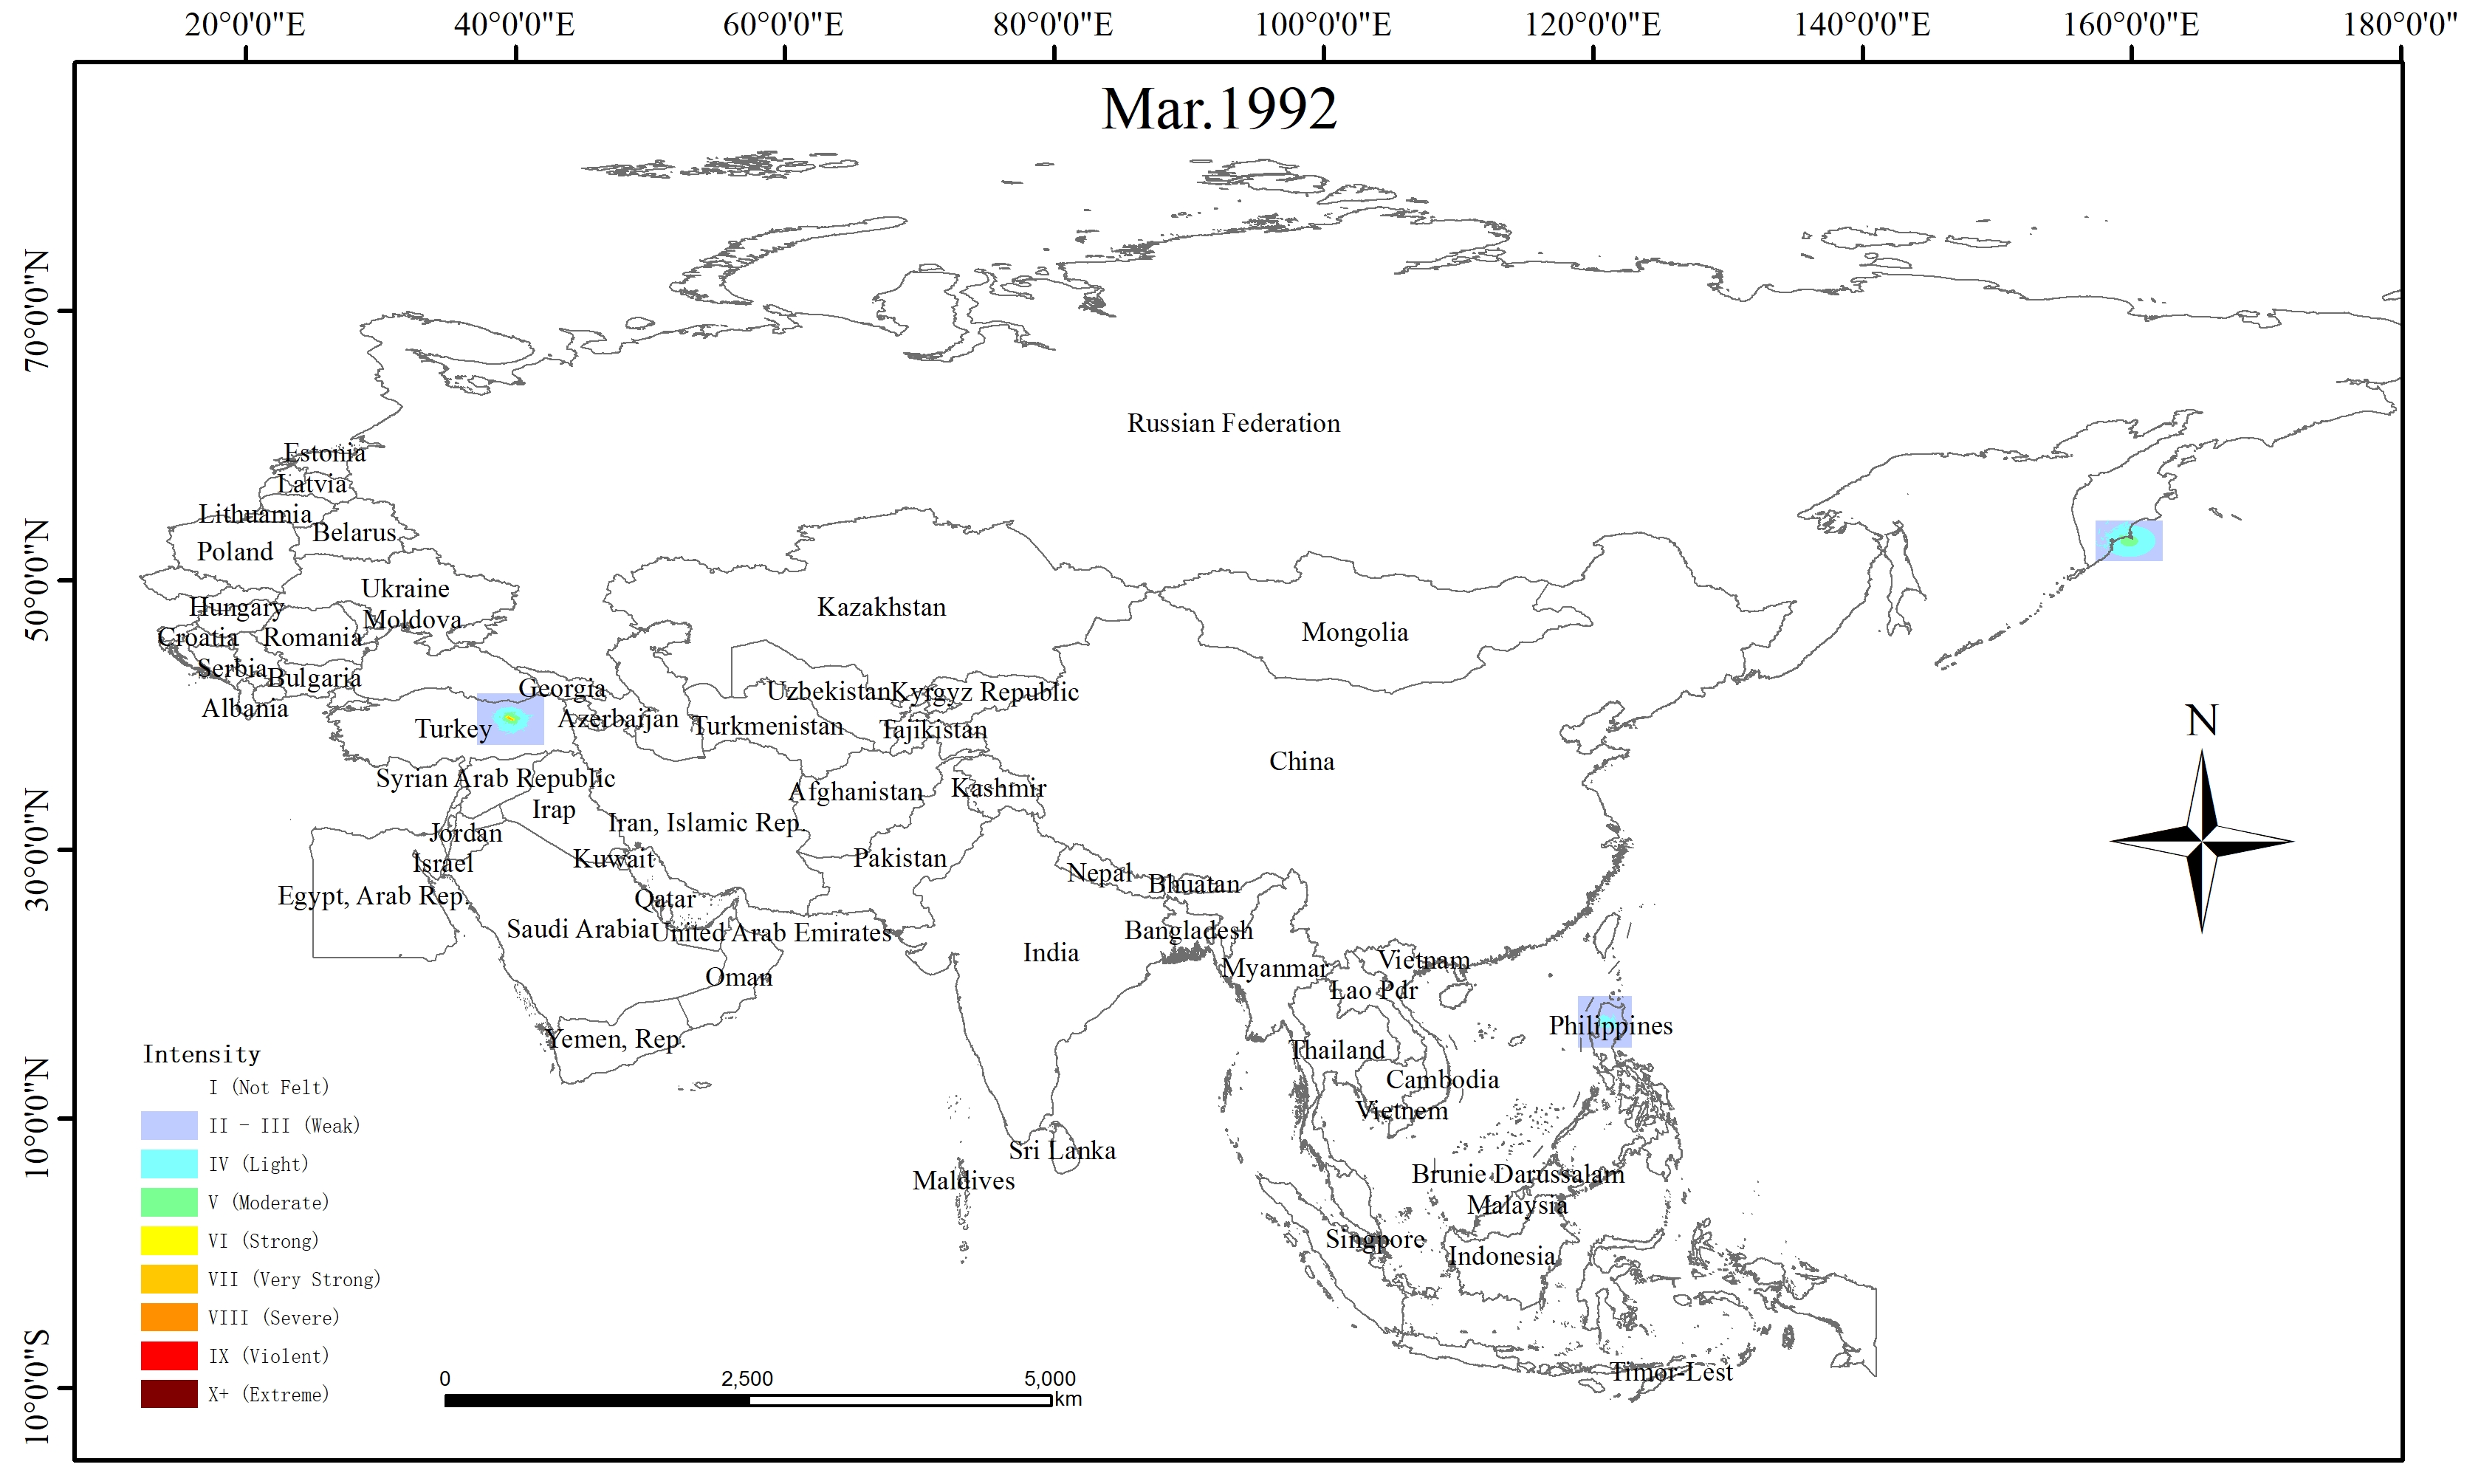 Spatio-temporal Distribution of Earthquake Disaster in the Belt and Road Area in 1992